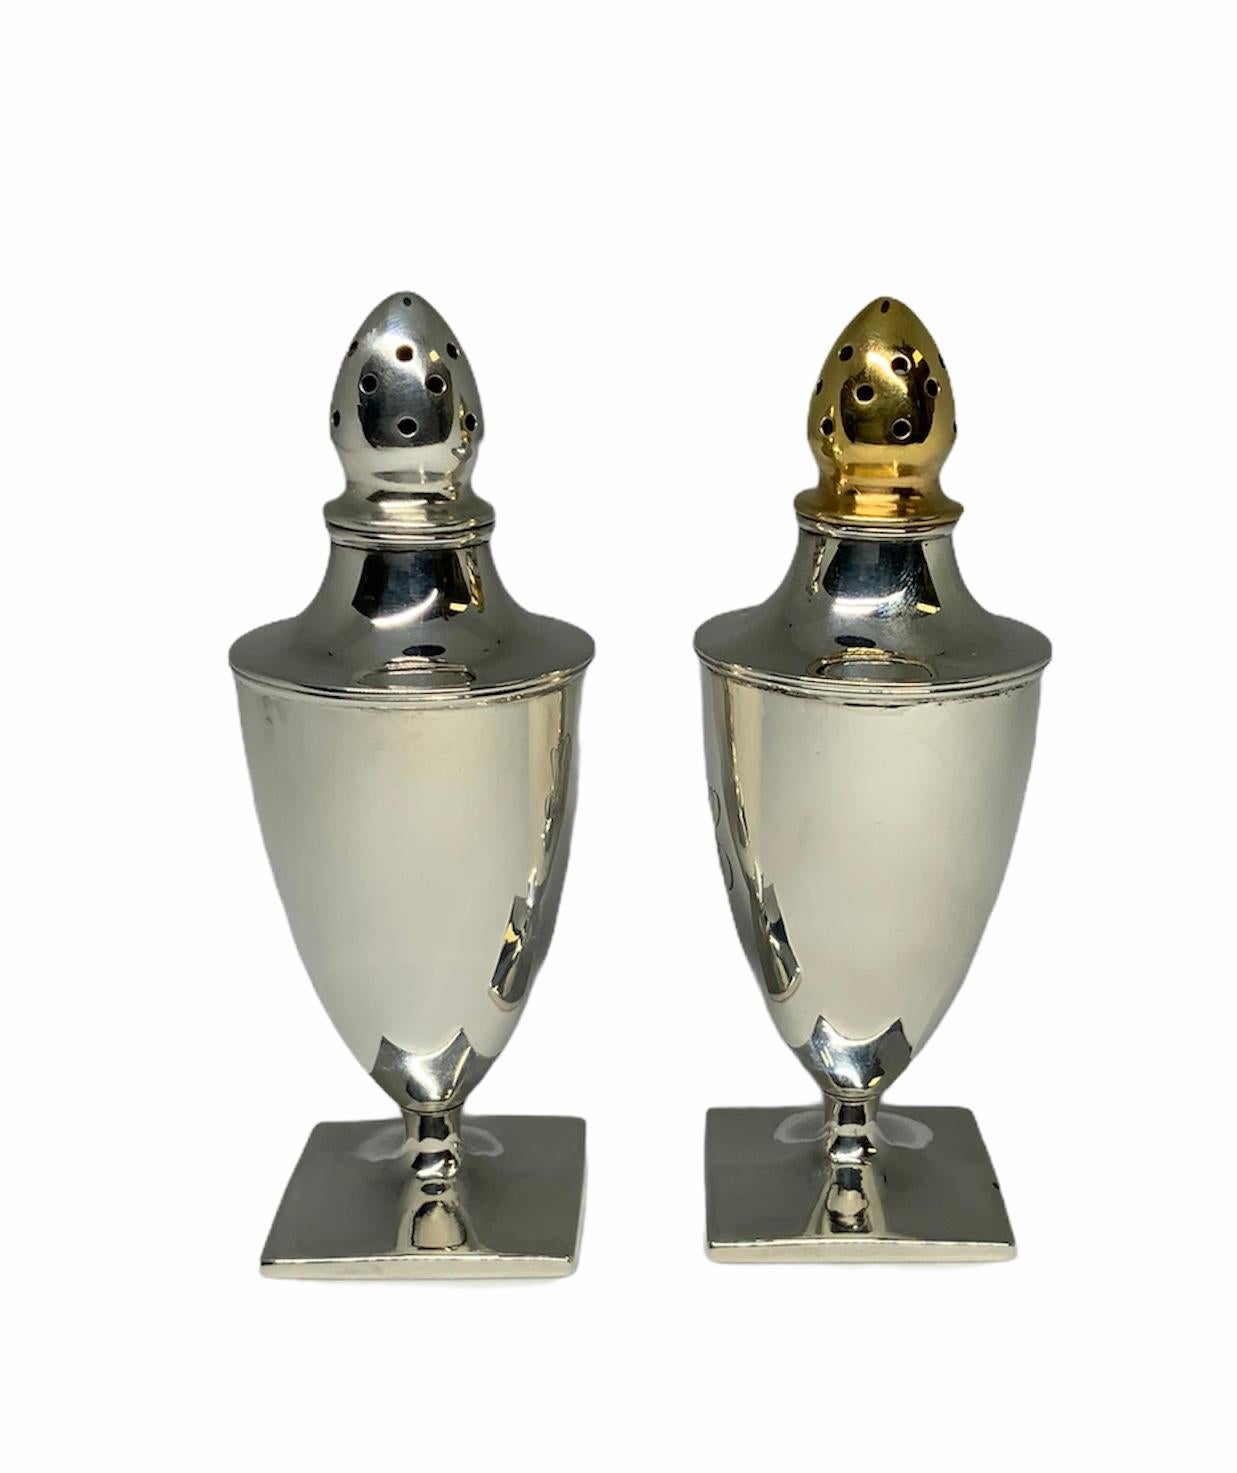 This is a set of possible Gorham sterling salt and pepper shakers. Both of them have a shiny smooth surfaces and have engraved in a beautiful calligraphy the letters: PBTS. They are urn shaped with square base and the tops are shaped as an upside